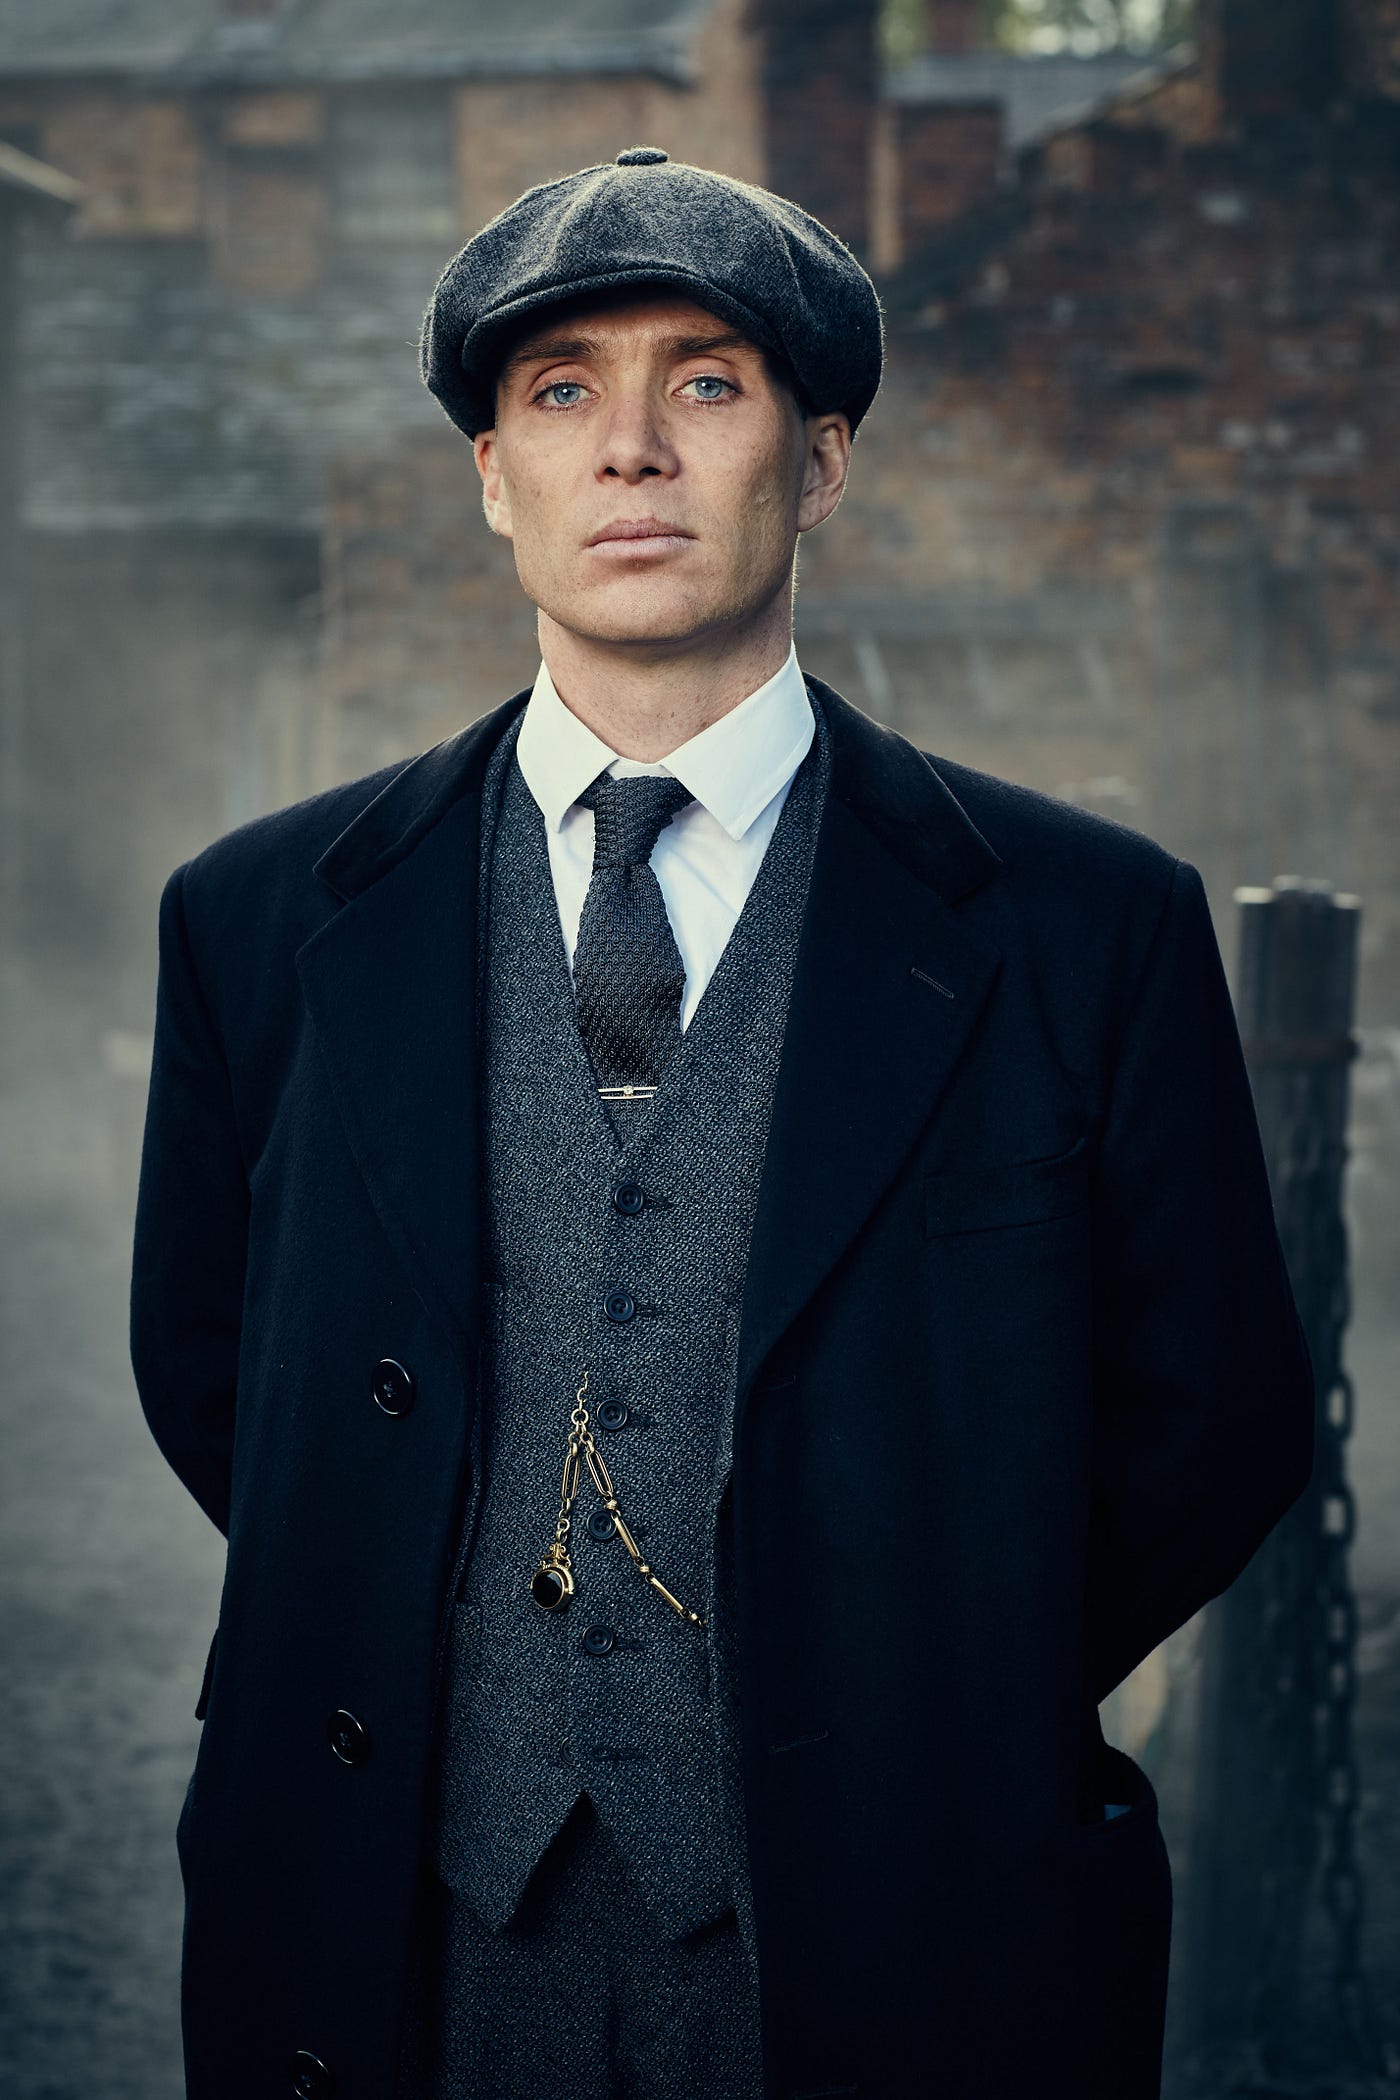 Lessons from Tommy Shelby: The Peaky Blinder from Birmingham, by Bill  Ivans Gbafore